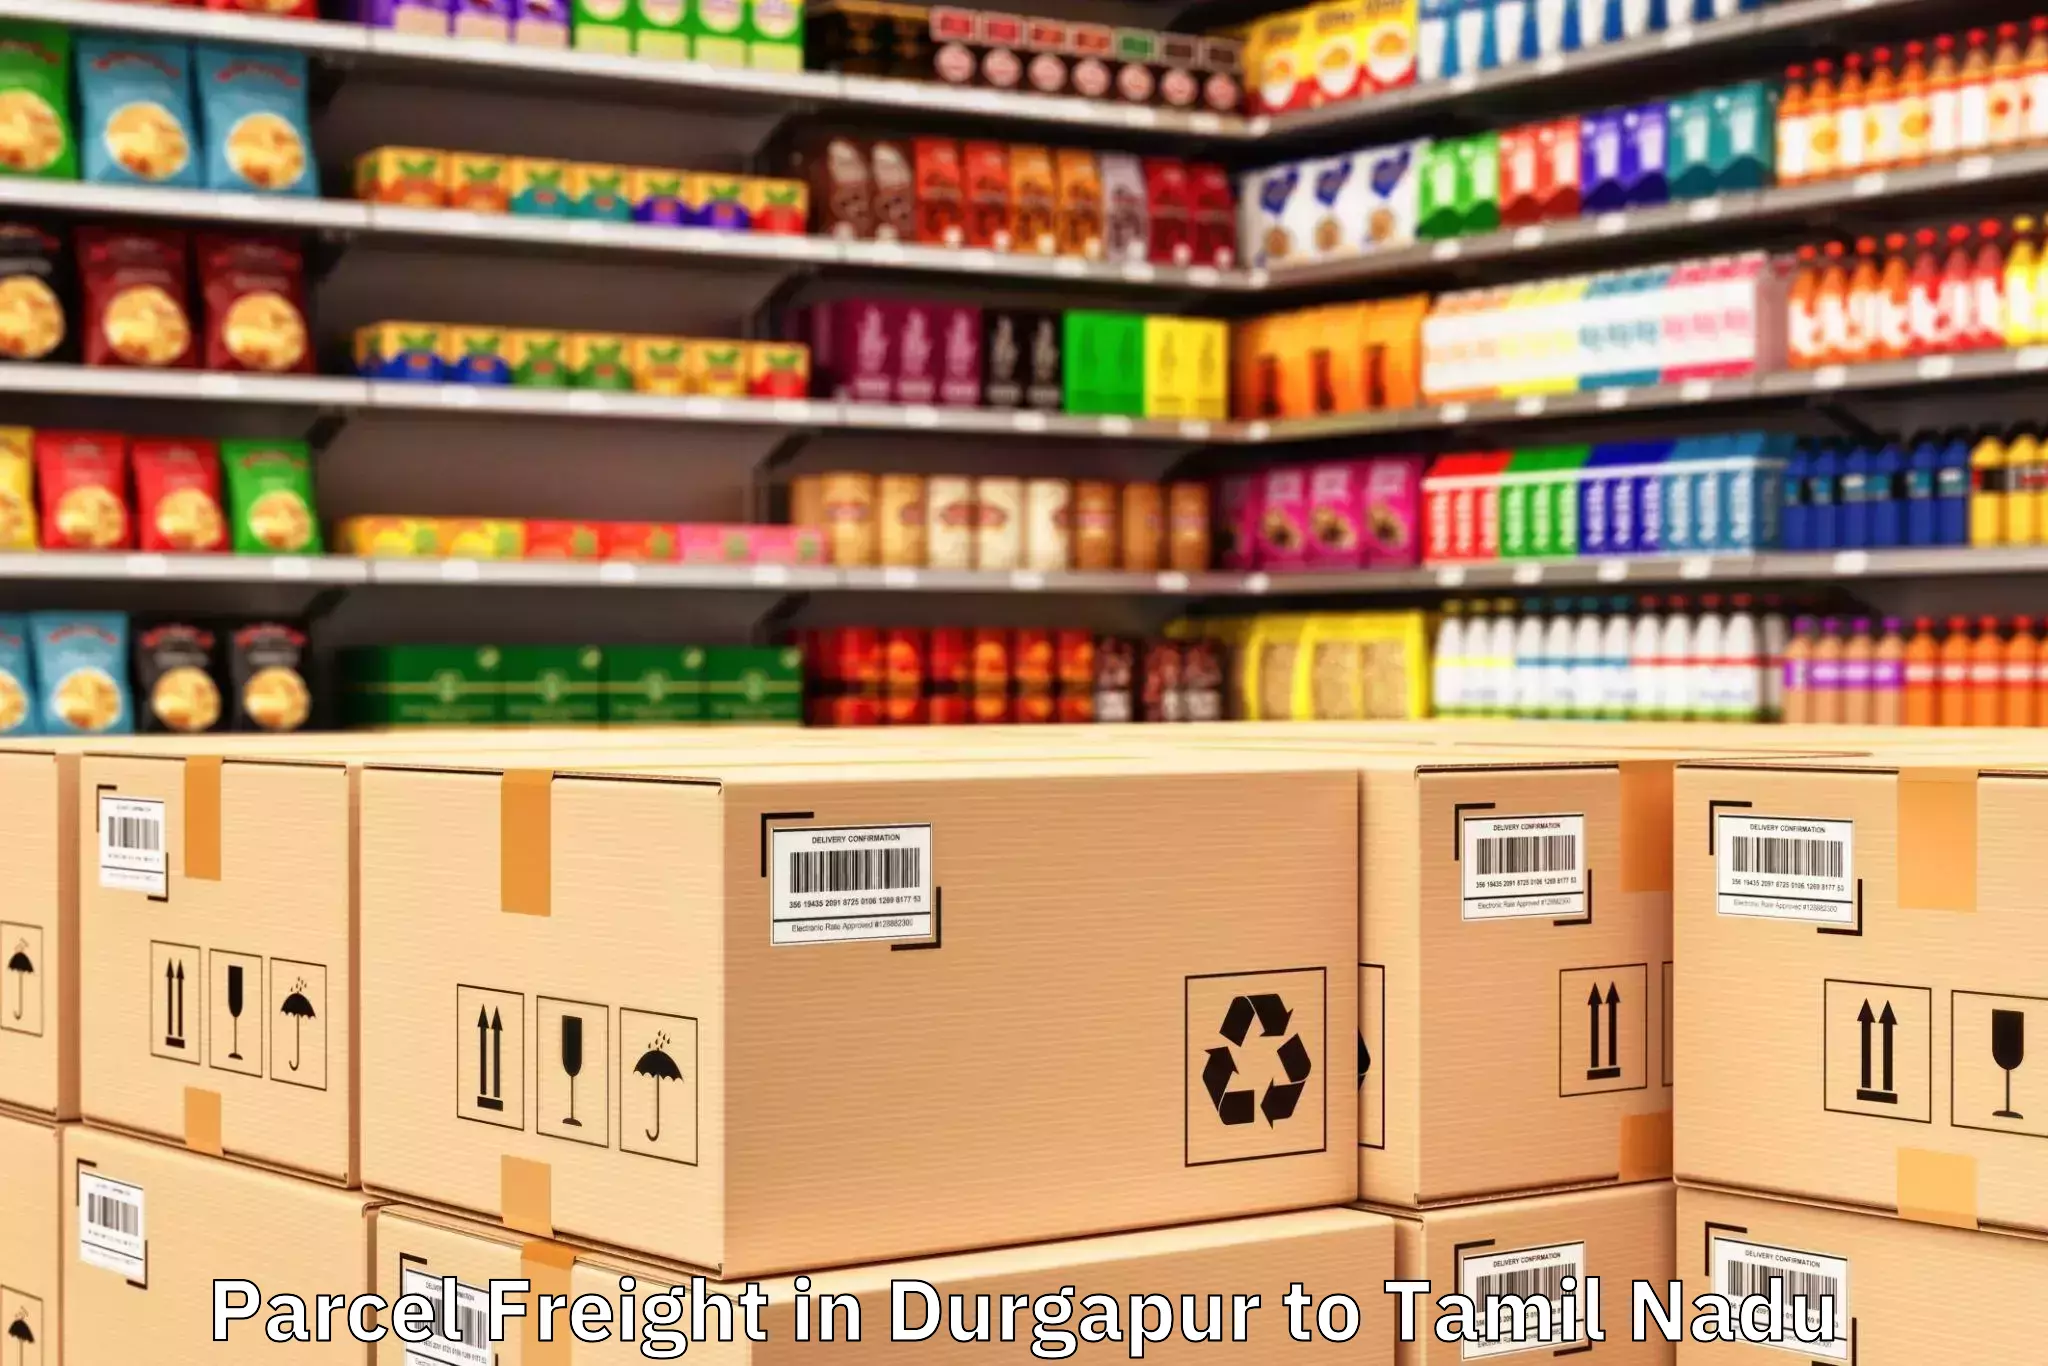 Book Your Durgapur to Ramanathapuram Parcel Freight Today